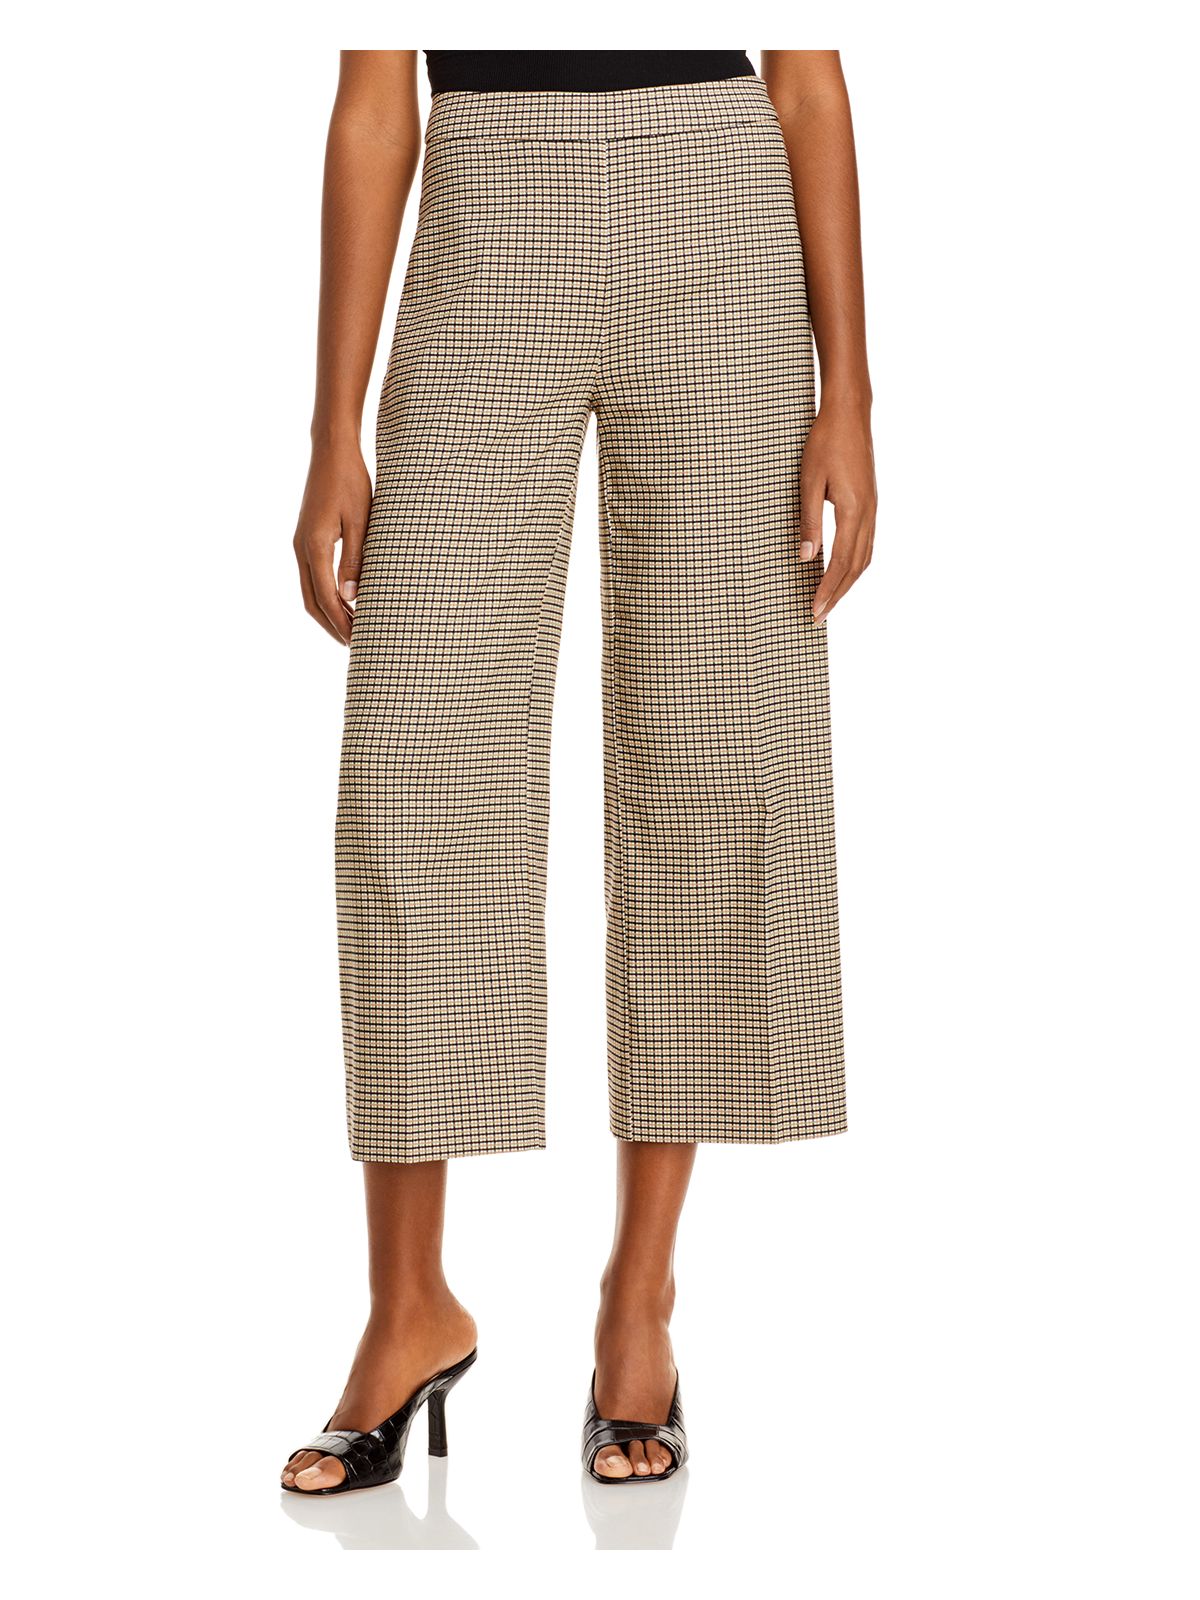 JUST Womens Beige Check Wear To Work Cropped Pants S